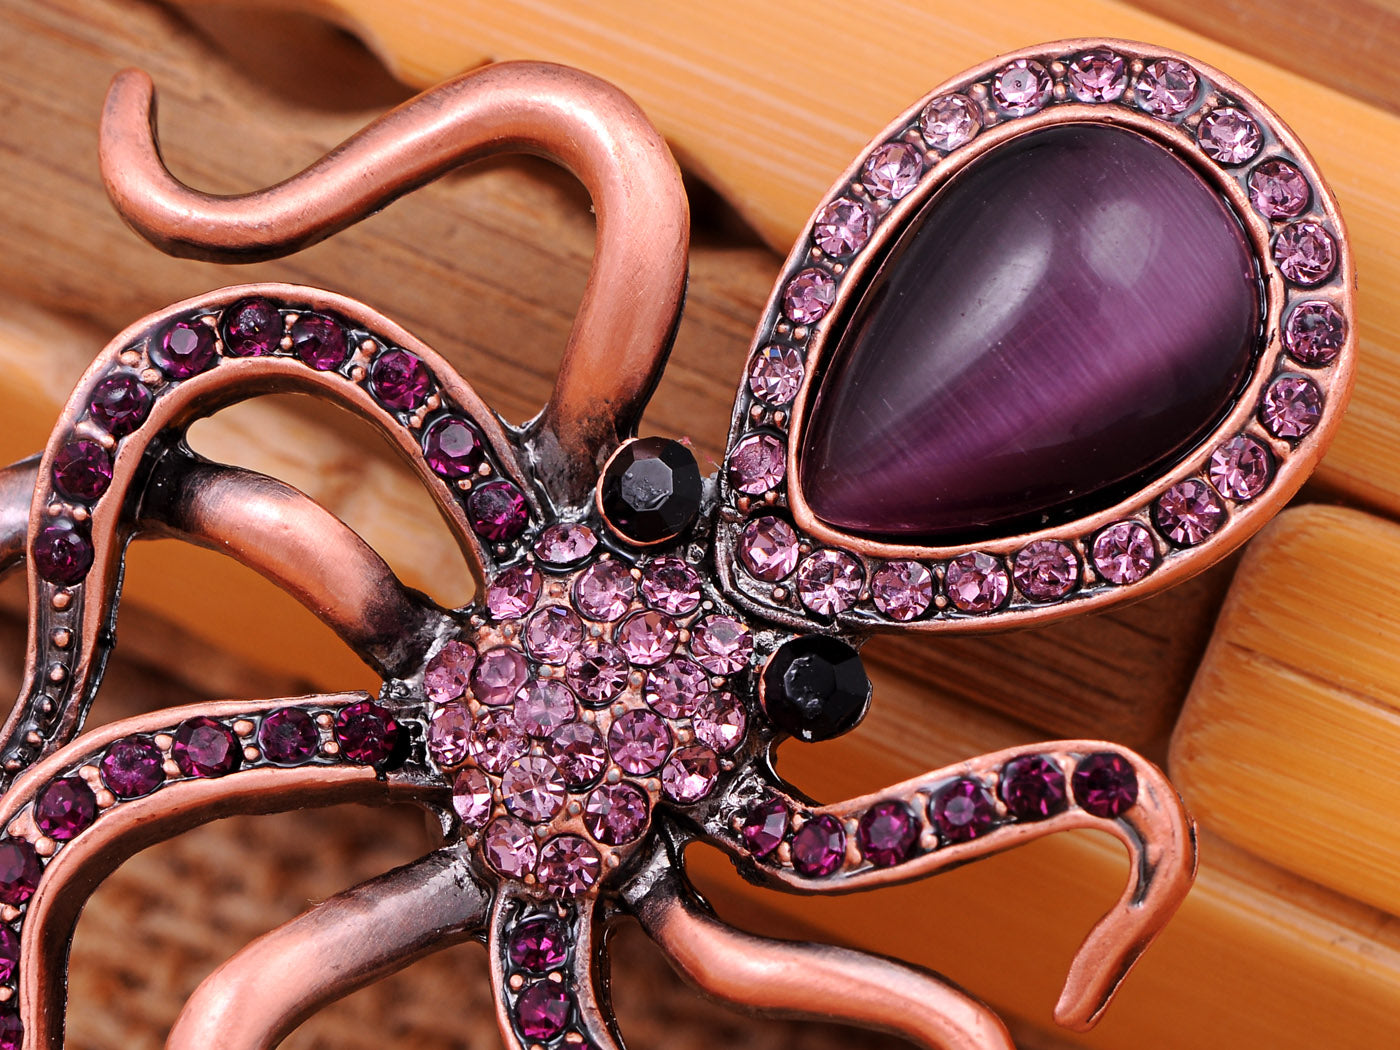 Slive Colored Nautical Rose Octopus Brooch Pin